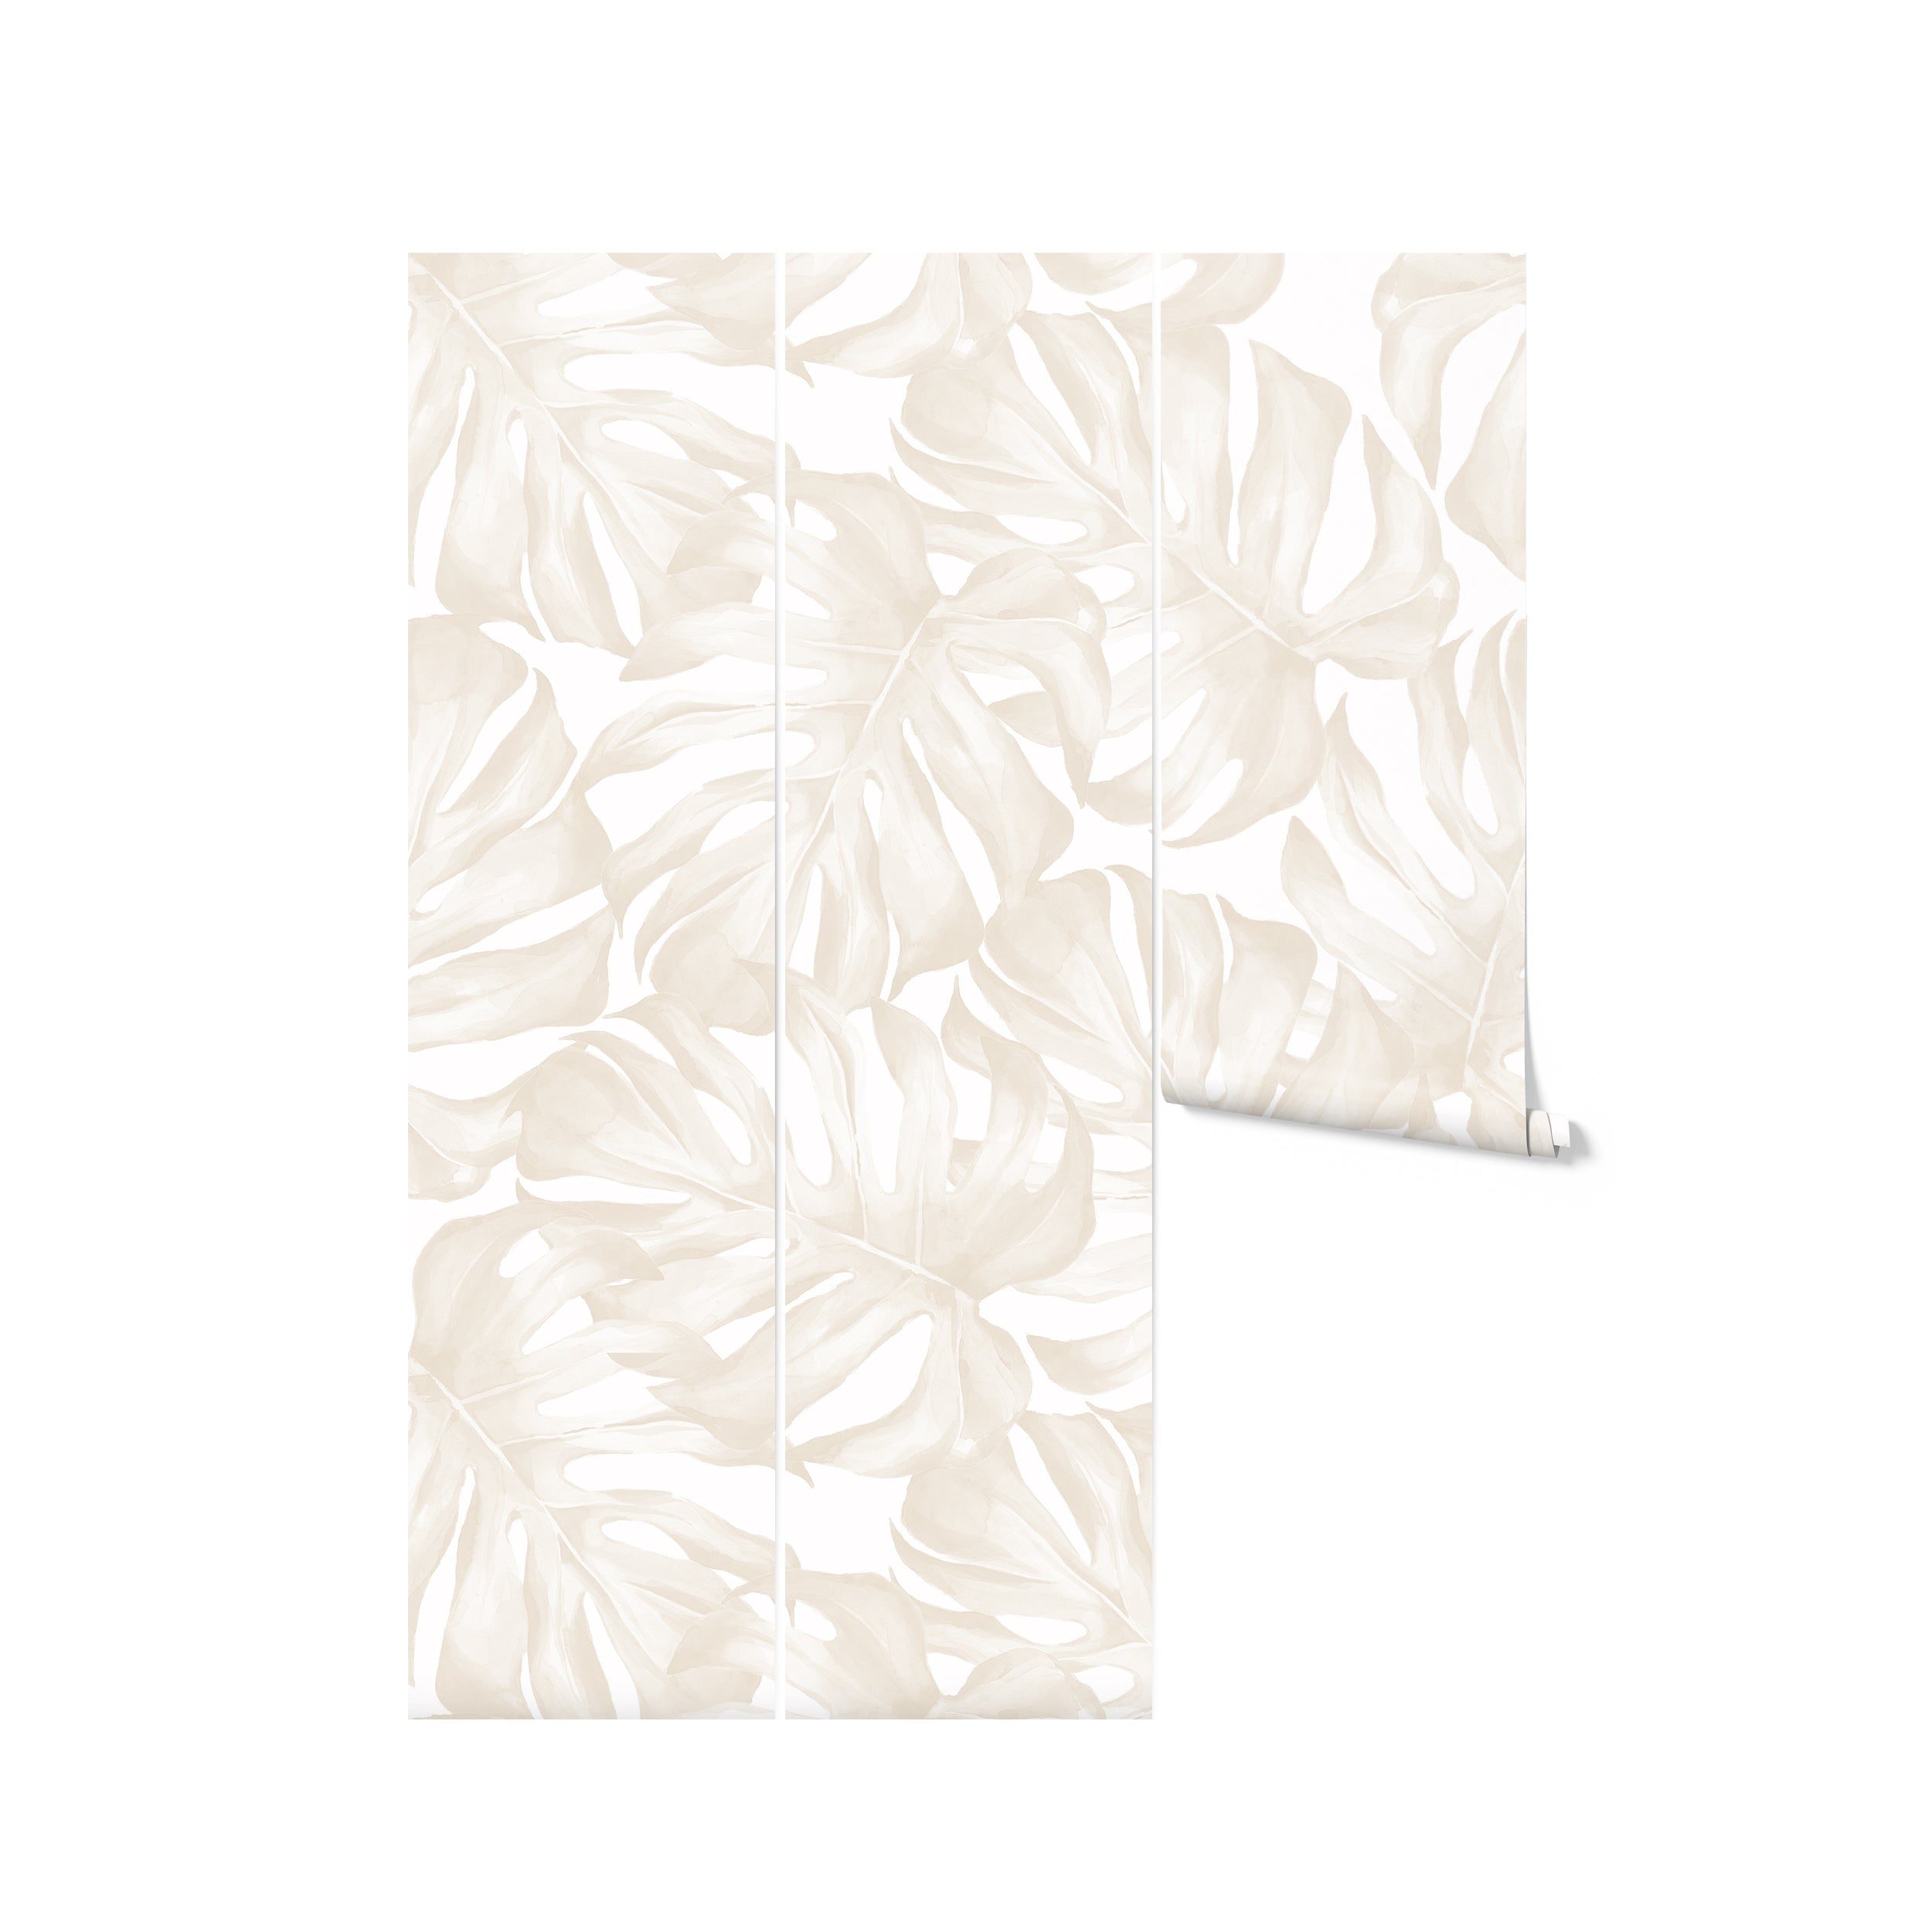 Roll of Modern Oasis Wallpaper - Ecru displaying the elegant pattern of large monstera leaves in soft ecru tones. The minimalist design is perfect for creating a modern and tranquil environment in any room